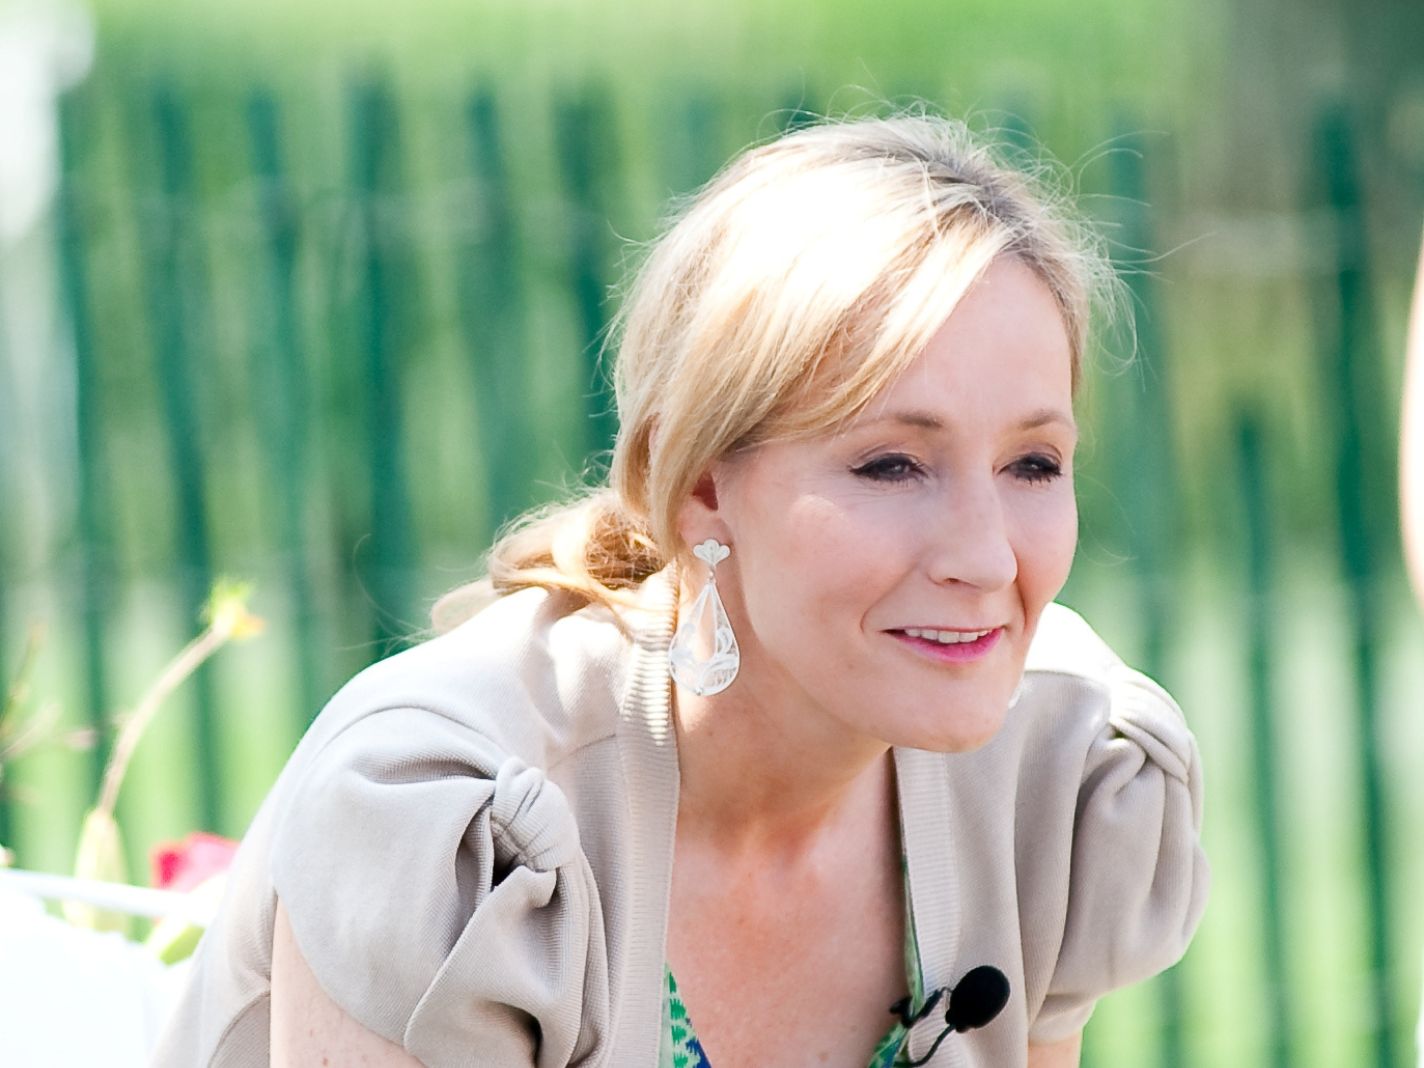 J.K. Rowling reads from Harry Potter and the Sorcerer's Stone at the Easter Egg Roll at the White House in 2010.